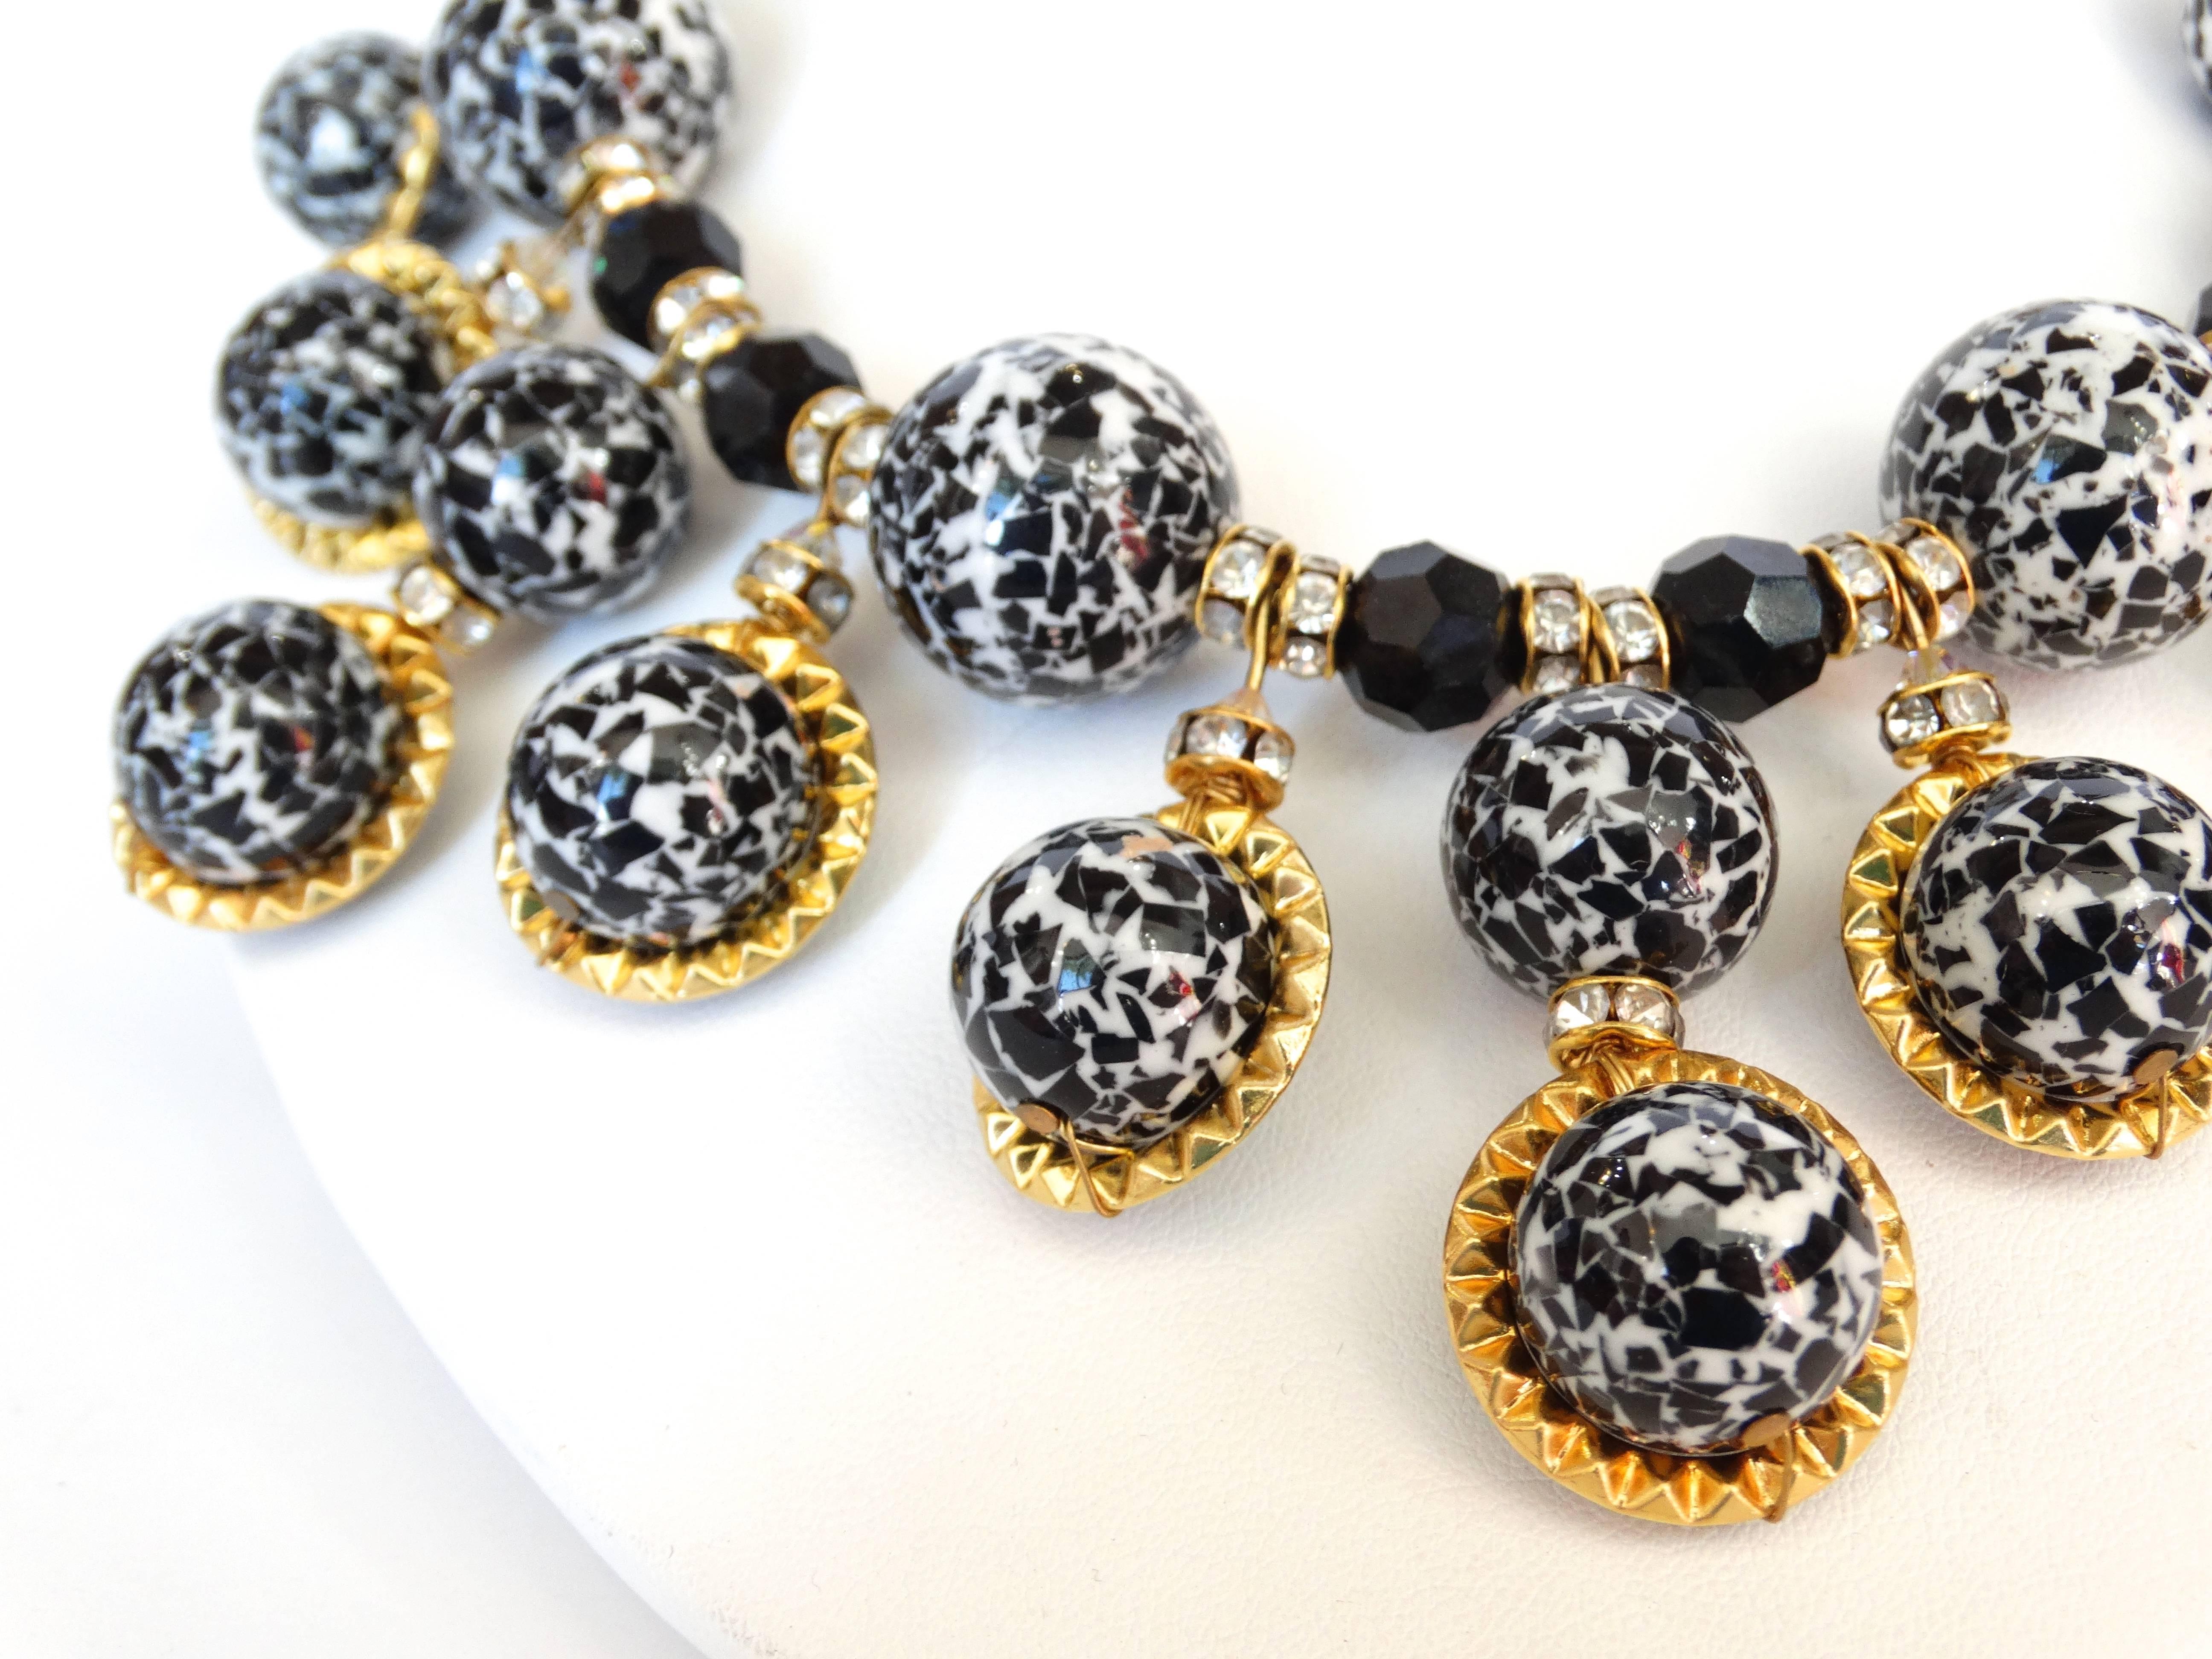 Incredible 1980s confetti bead necklace with matching earrings! The perfect baubles to give that little black dress some character! Black and white marbled beads accented with crimped gold metal and rhinestones. Button earrings in the same black and